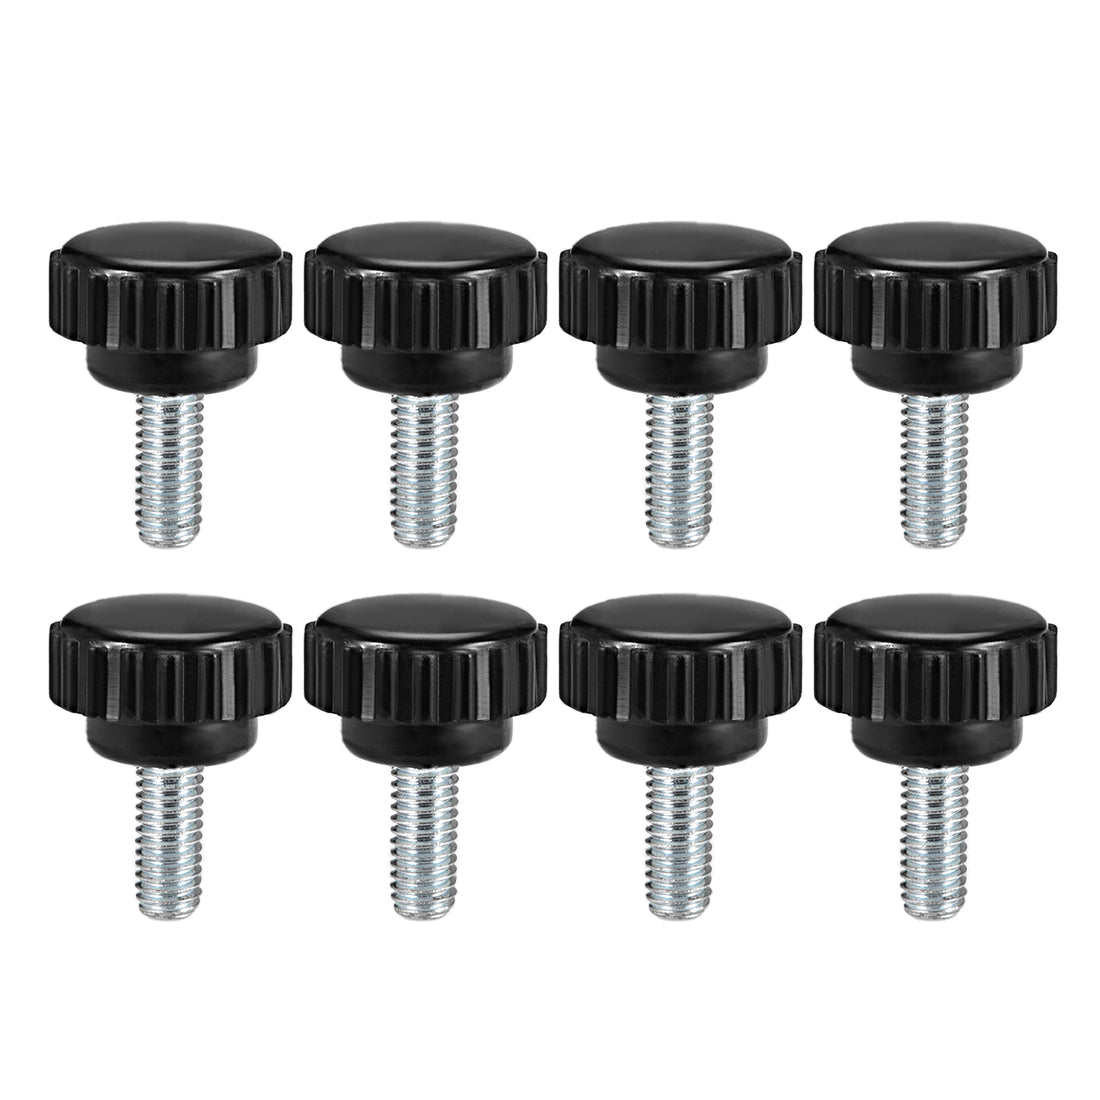 uxcell Uxcell M6 x 10mm Male Thread Knurled Clamping Knobs Grip Thumb Screw on Type 8 Pcs